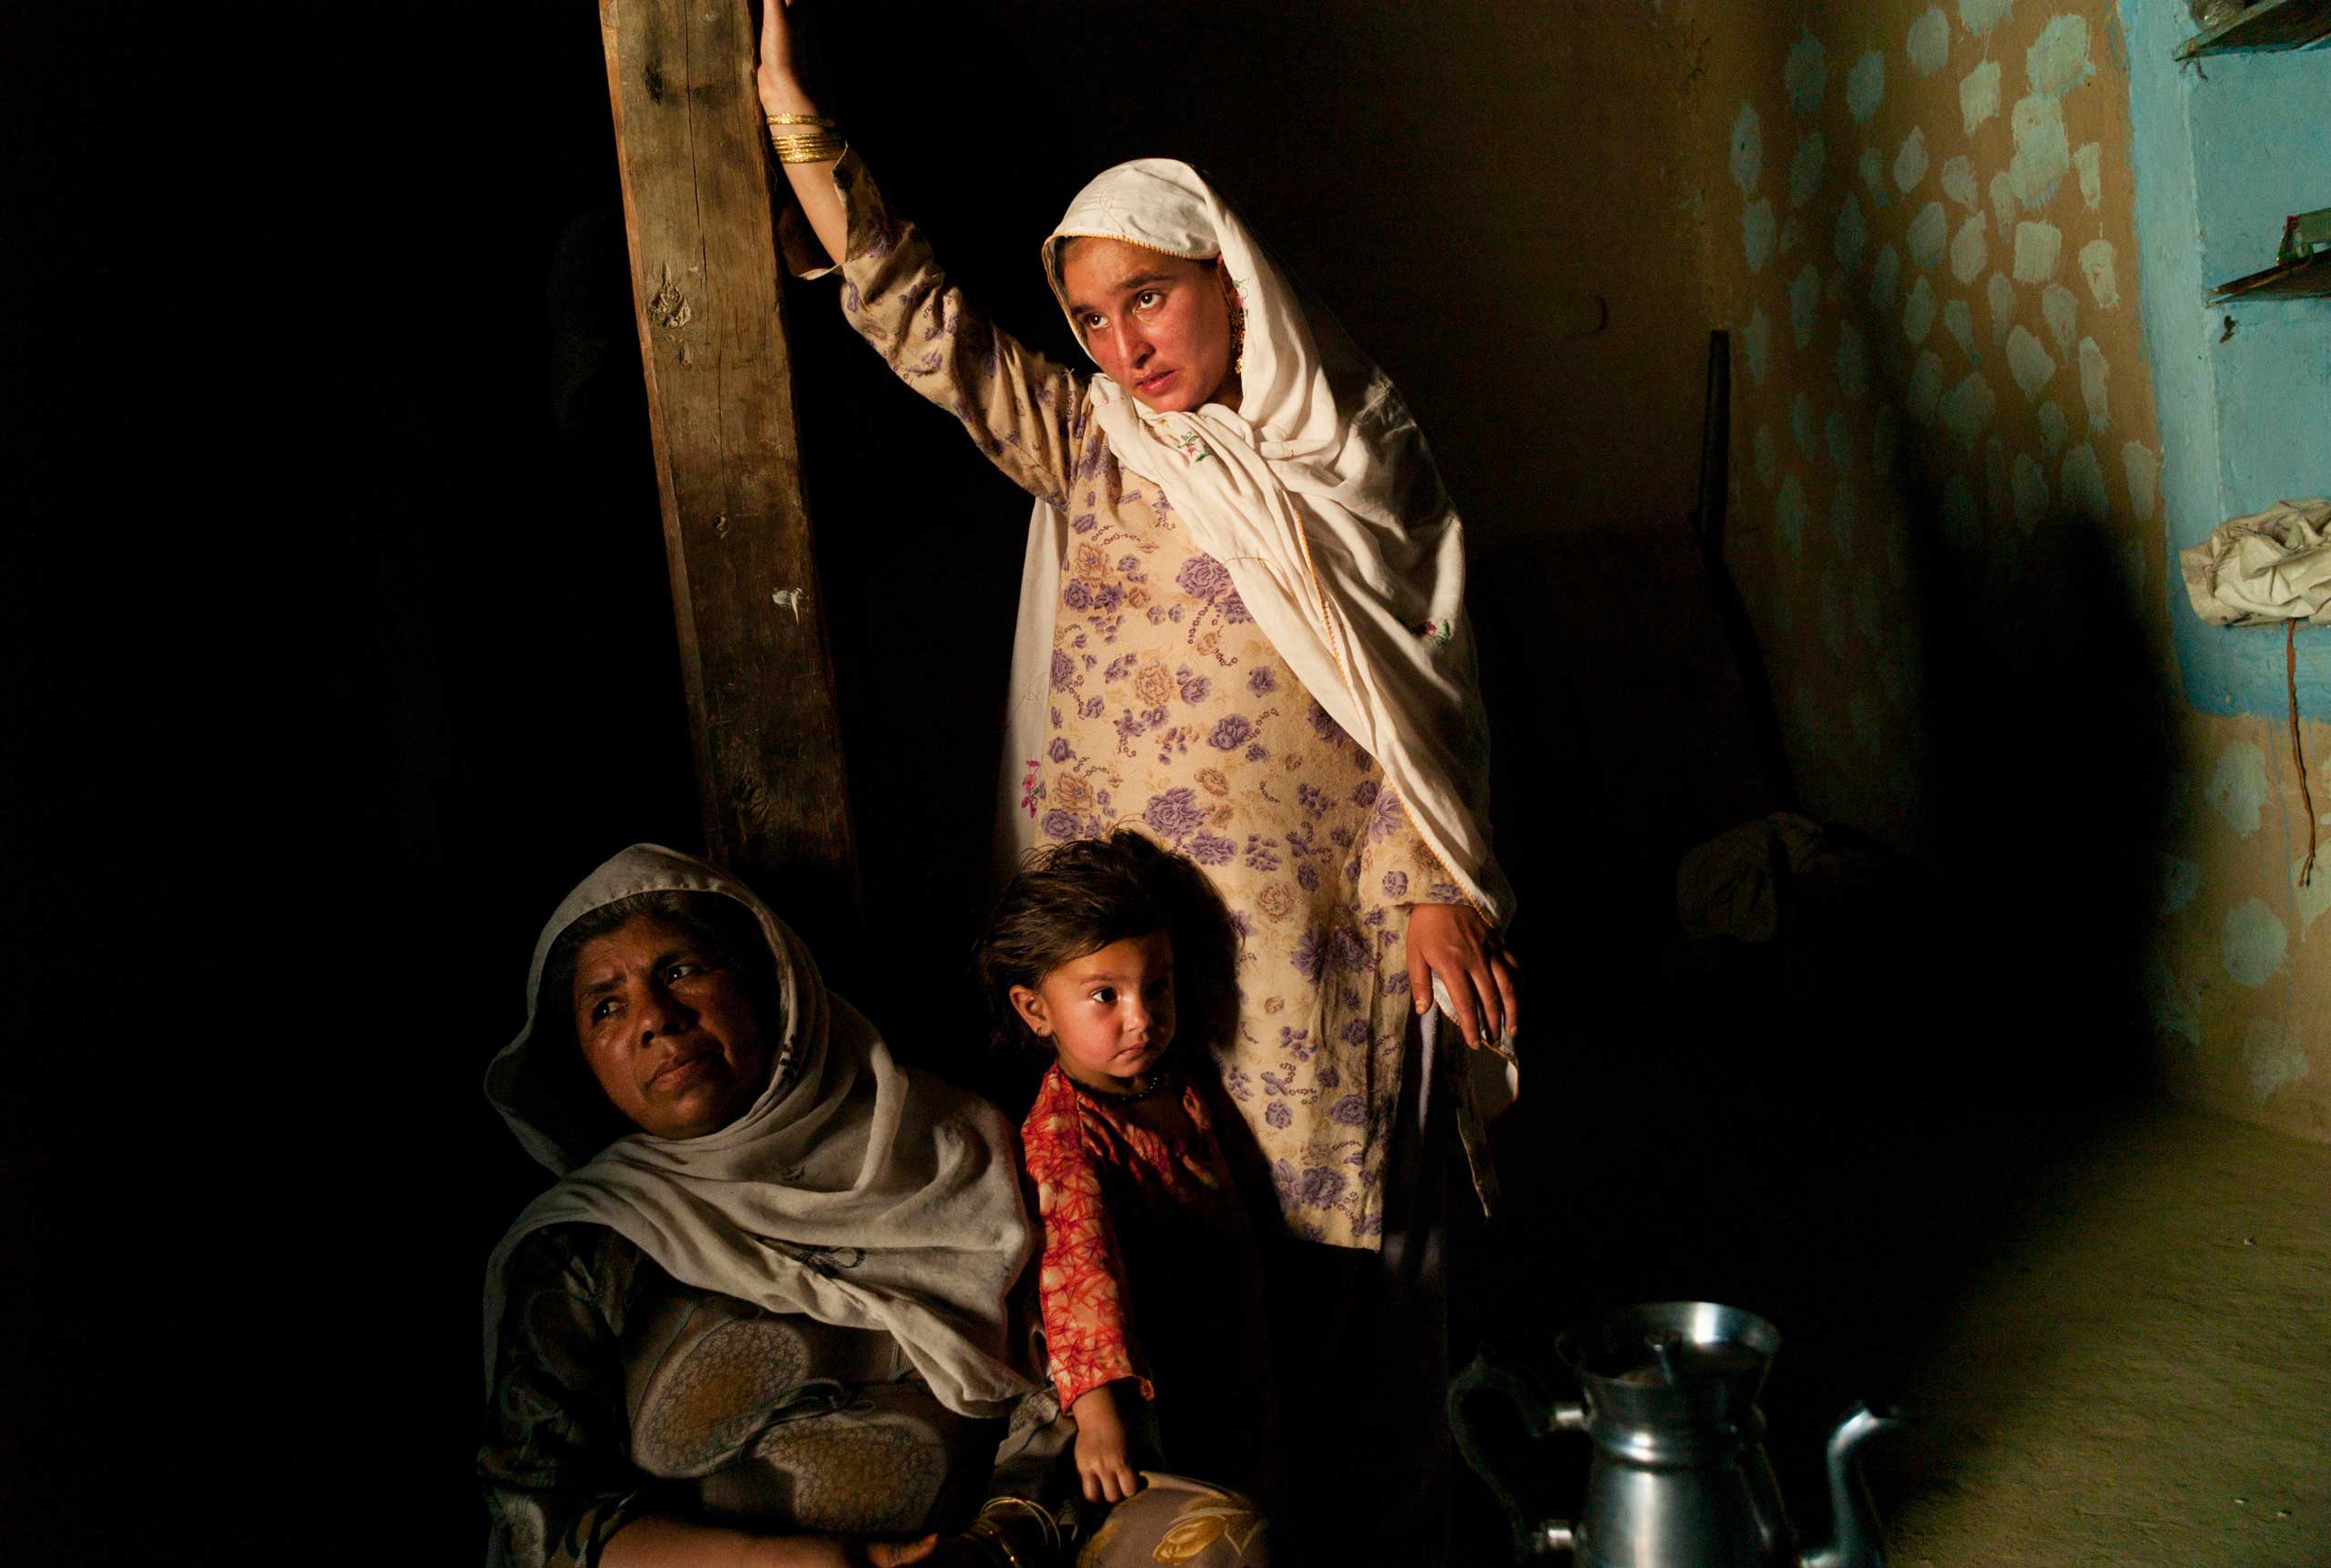 KUZA BANDAI, PAKISTAN- JUNE 2010  
                              66 year old mother of seven Gul Mina sits with her granddaughter in their small mud built home in the former Taliban stronghold of Derakai on the west bank of the Swat Valley. Along with her husband and five sons, Gul Mina, like the majority of women in her village, were ardent Taliban supporters. While her boys were ready to join the insurgents, Gul Mina became doubtful when the assassinations and beheadings began but it was hard to change sides within such a hardcore, close-knit community. As army operations commenced in the spring of 2009, she persuaded her family to flee the valley in search of refuge.